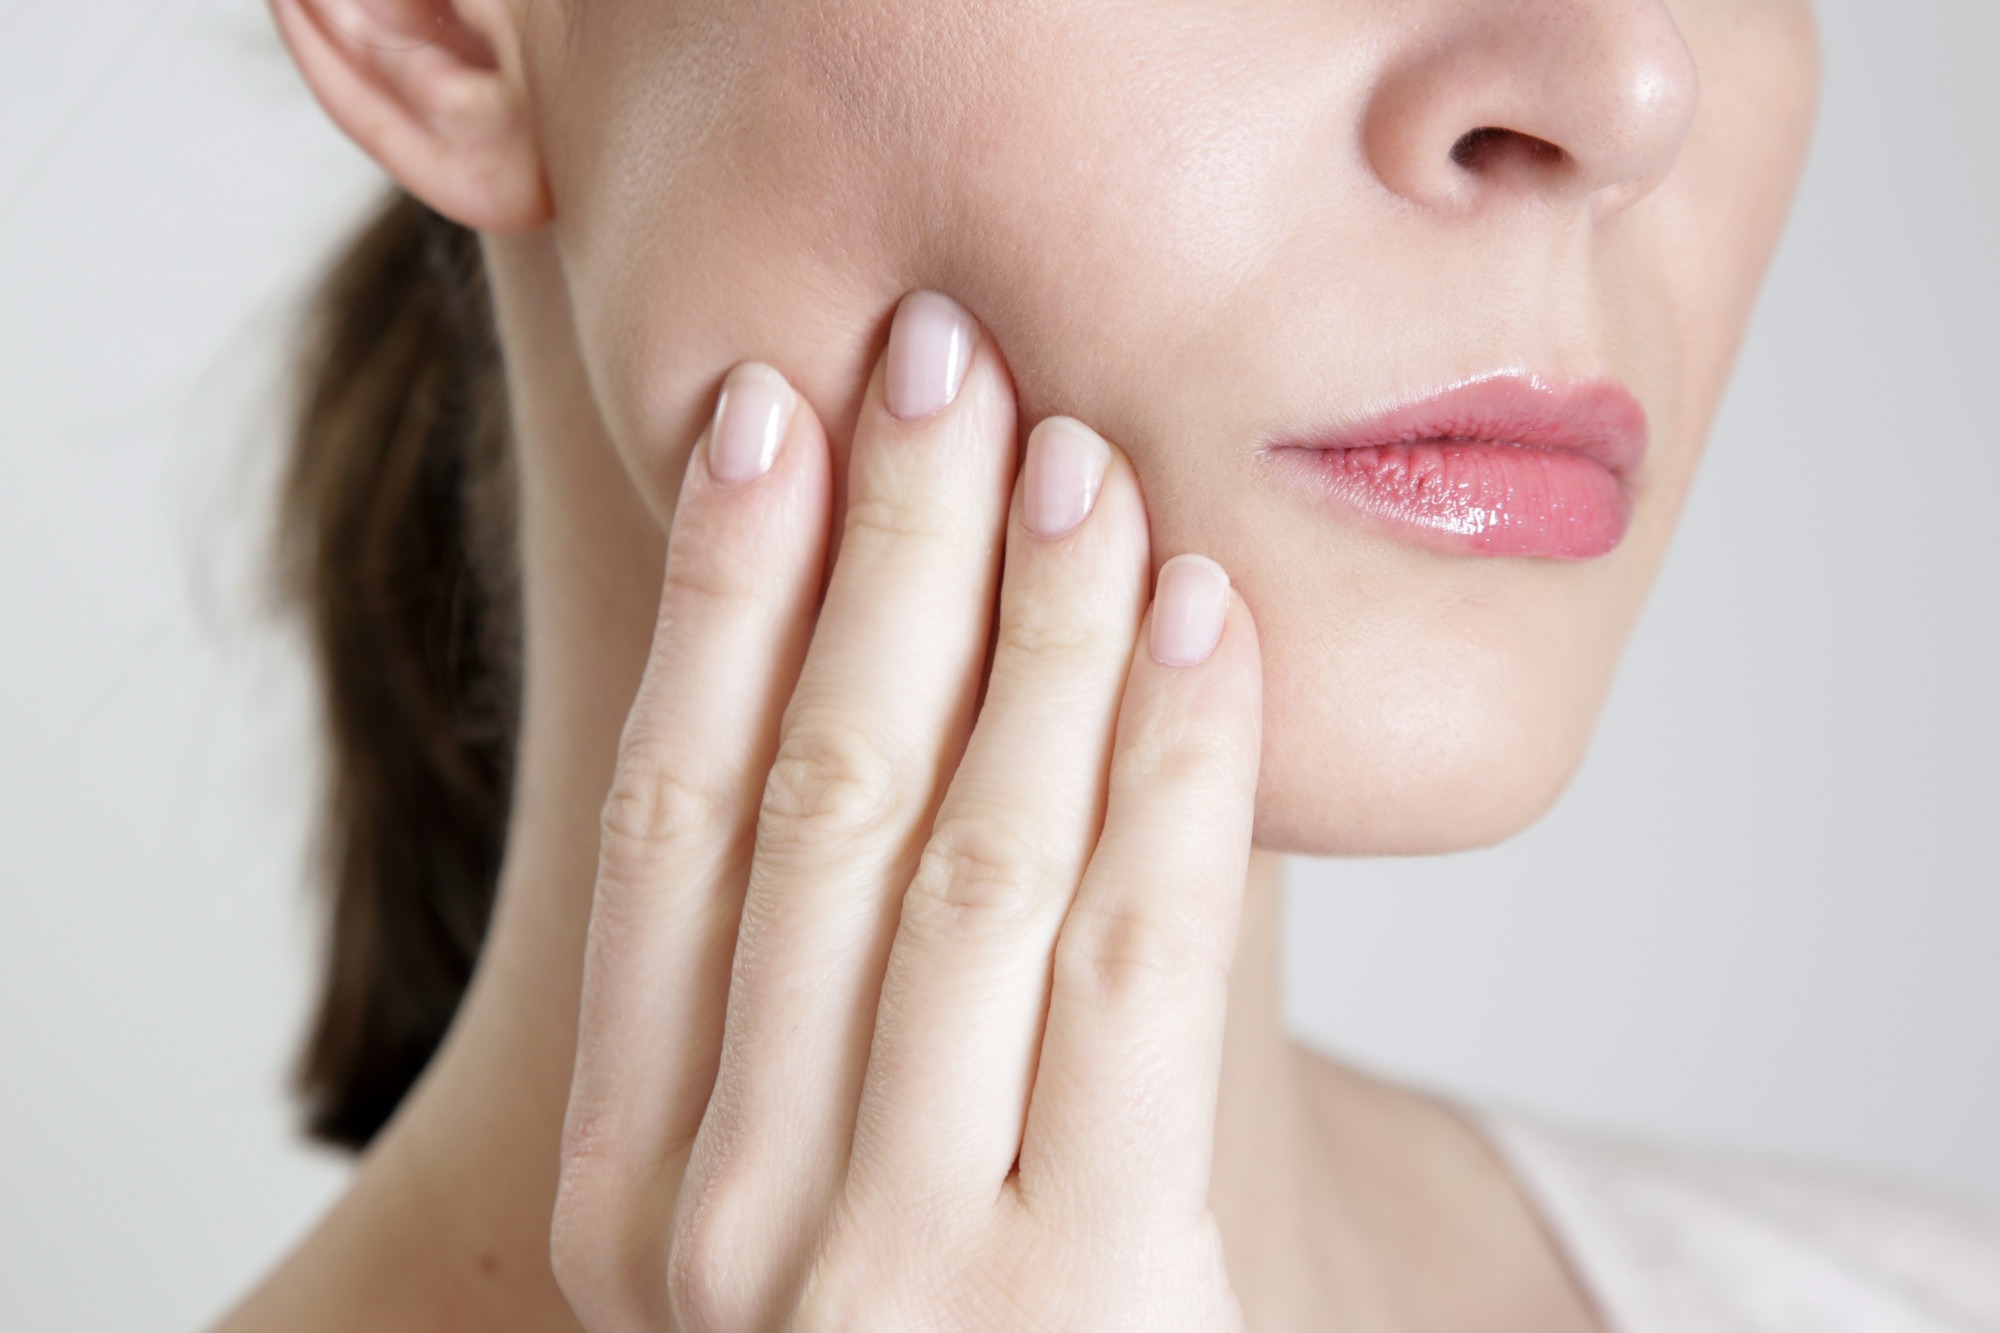 How to Stop Sensitive Teeth Pain Immediately